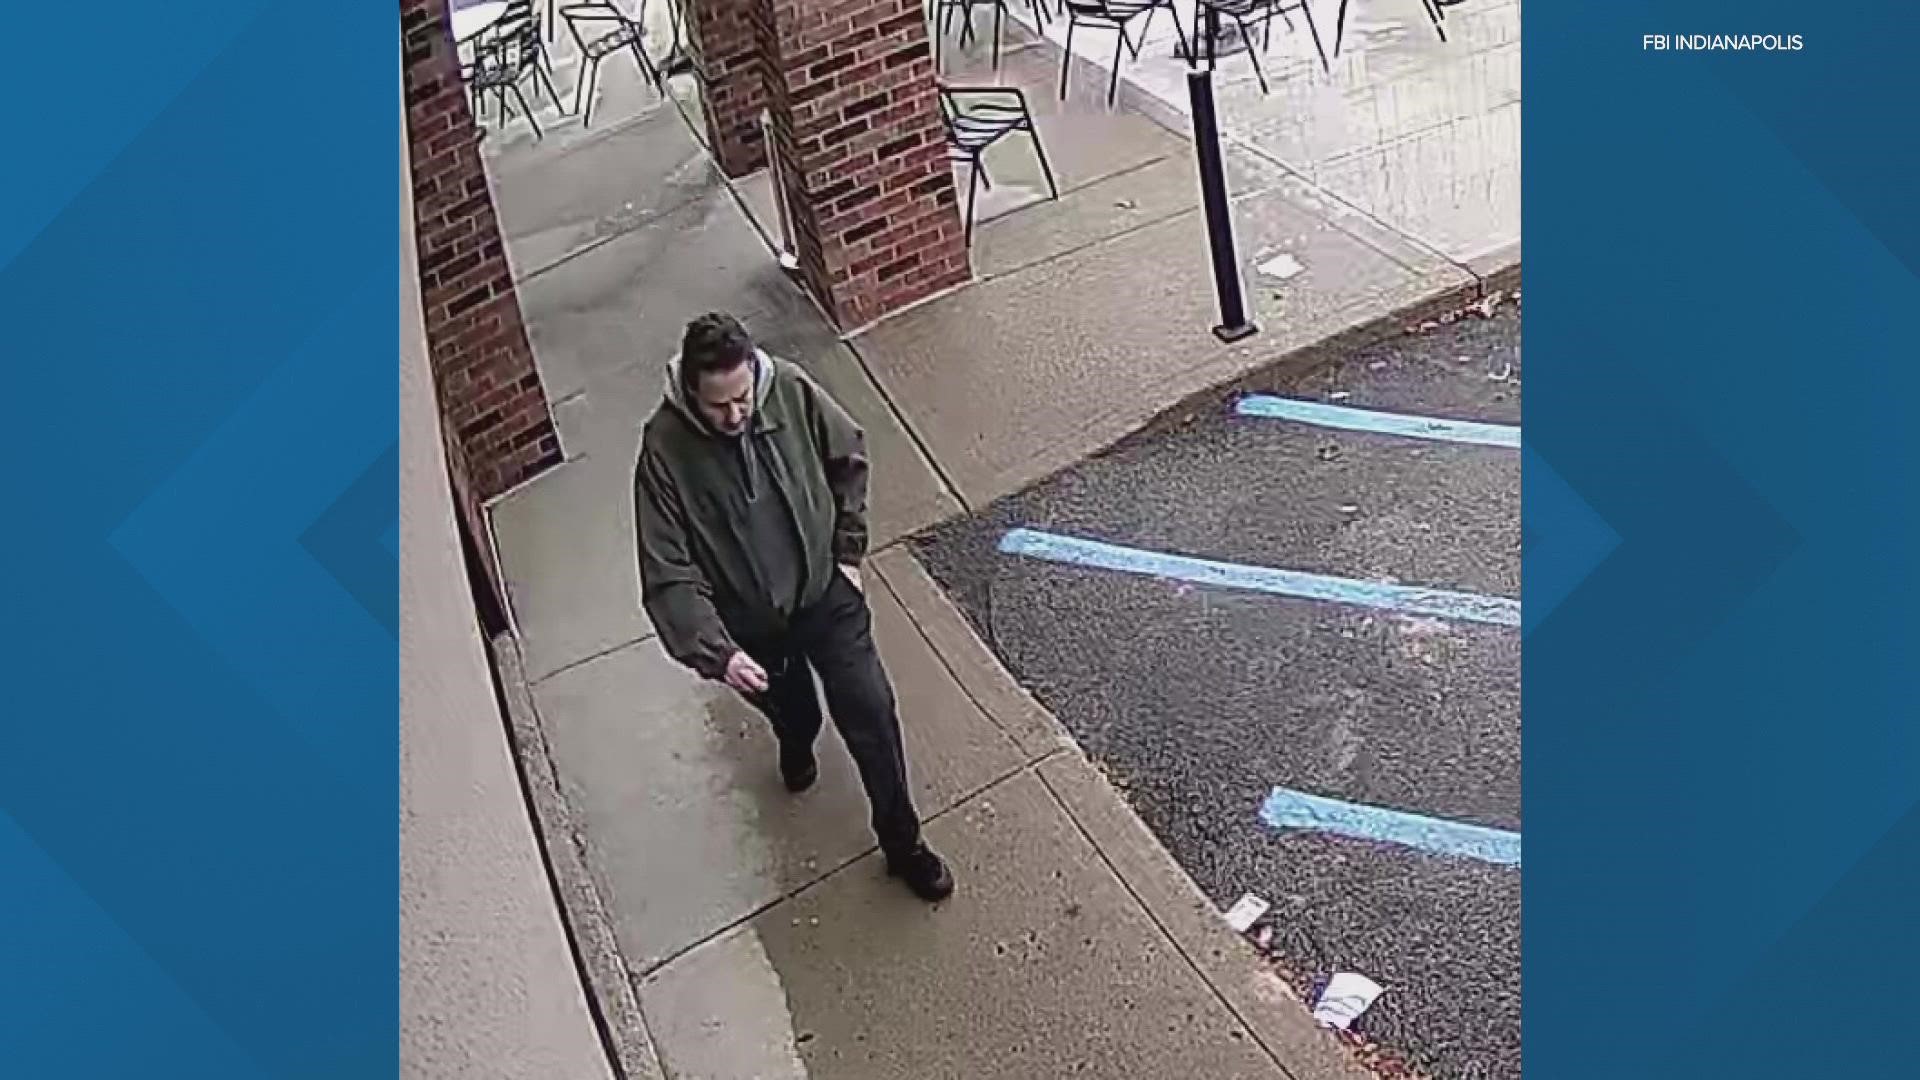 Security cameras captured images of the suspect in Indianapolis.